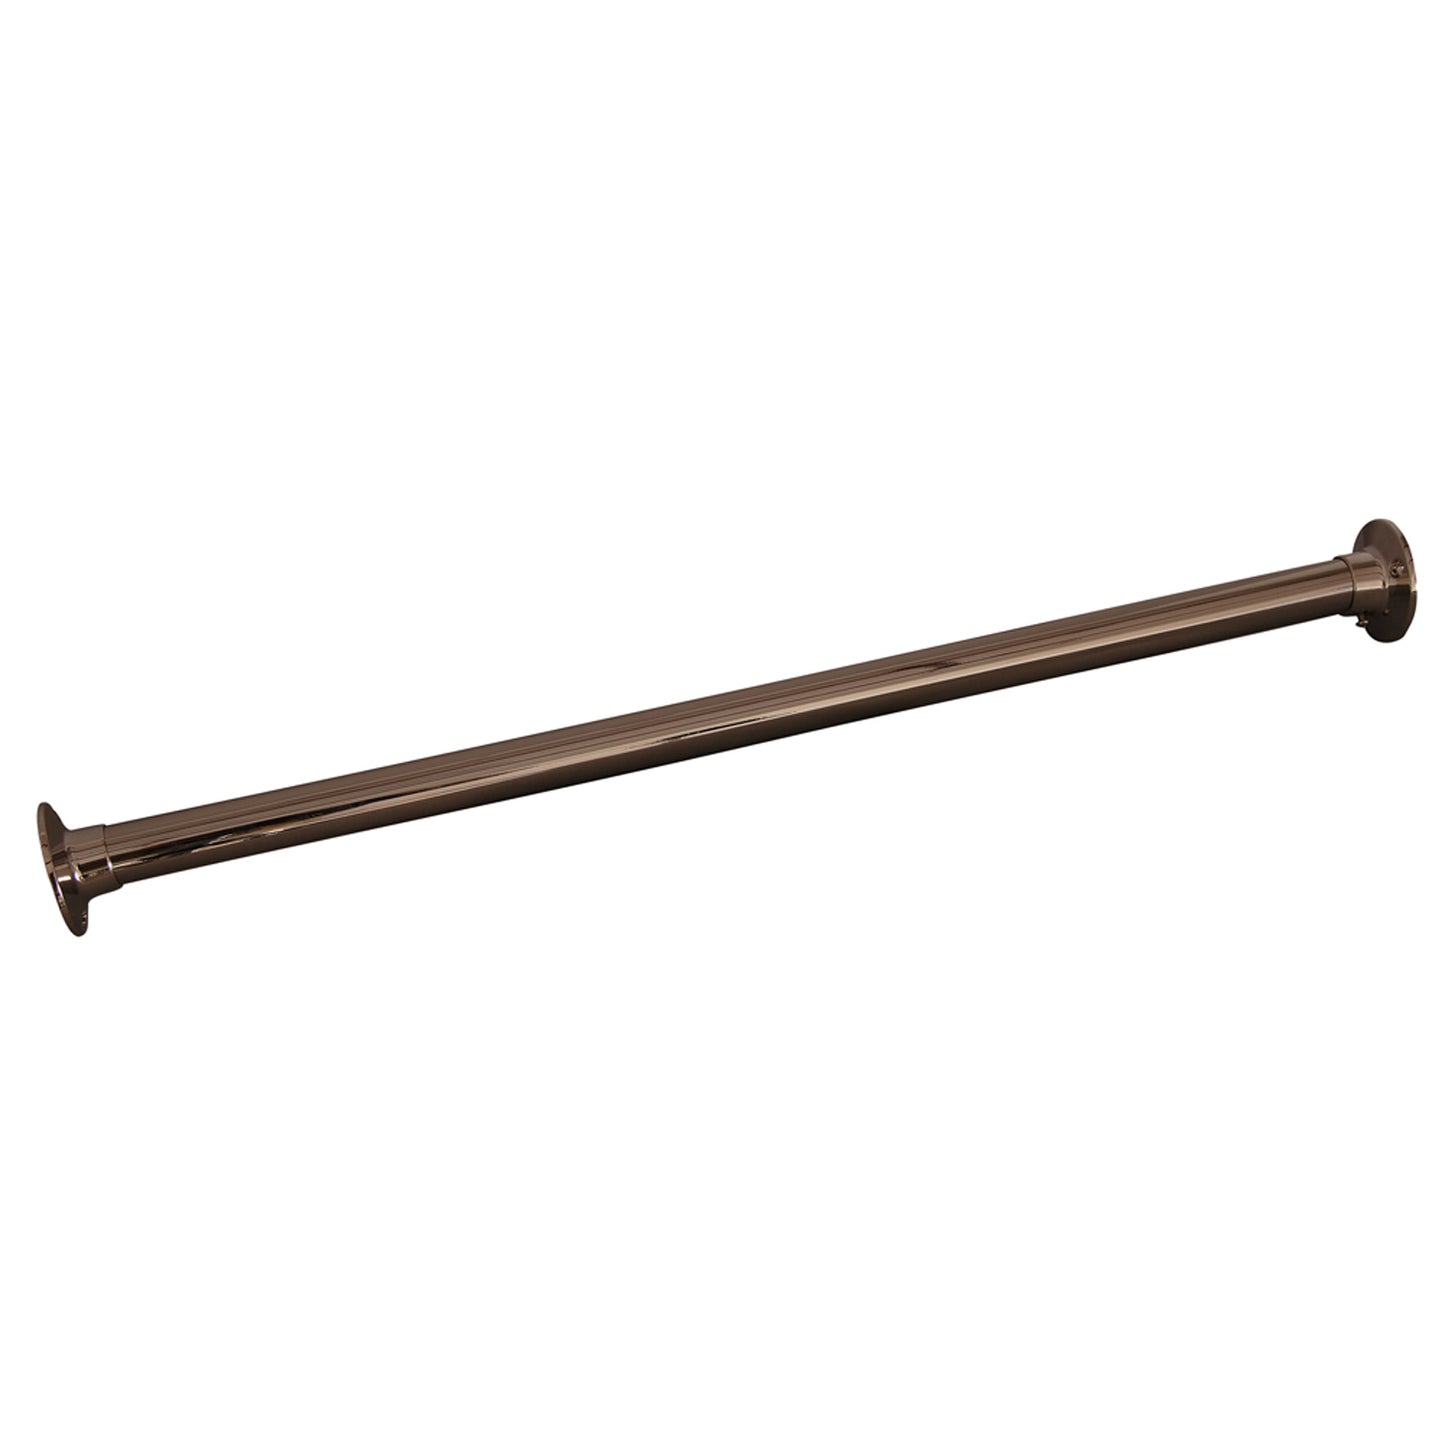 72" Straight Shower Rod in Polished Nickel